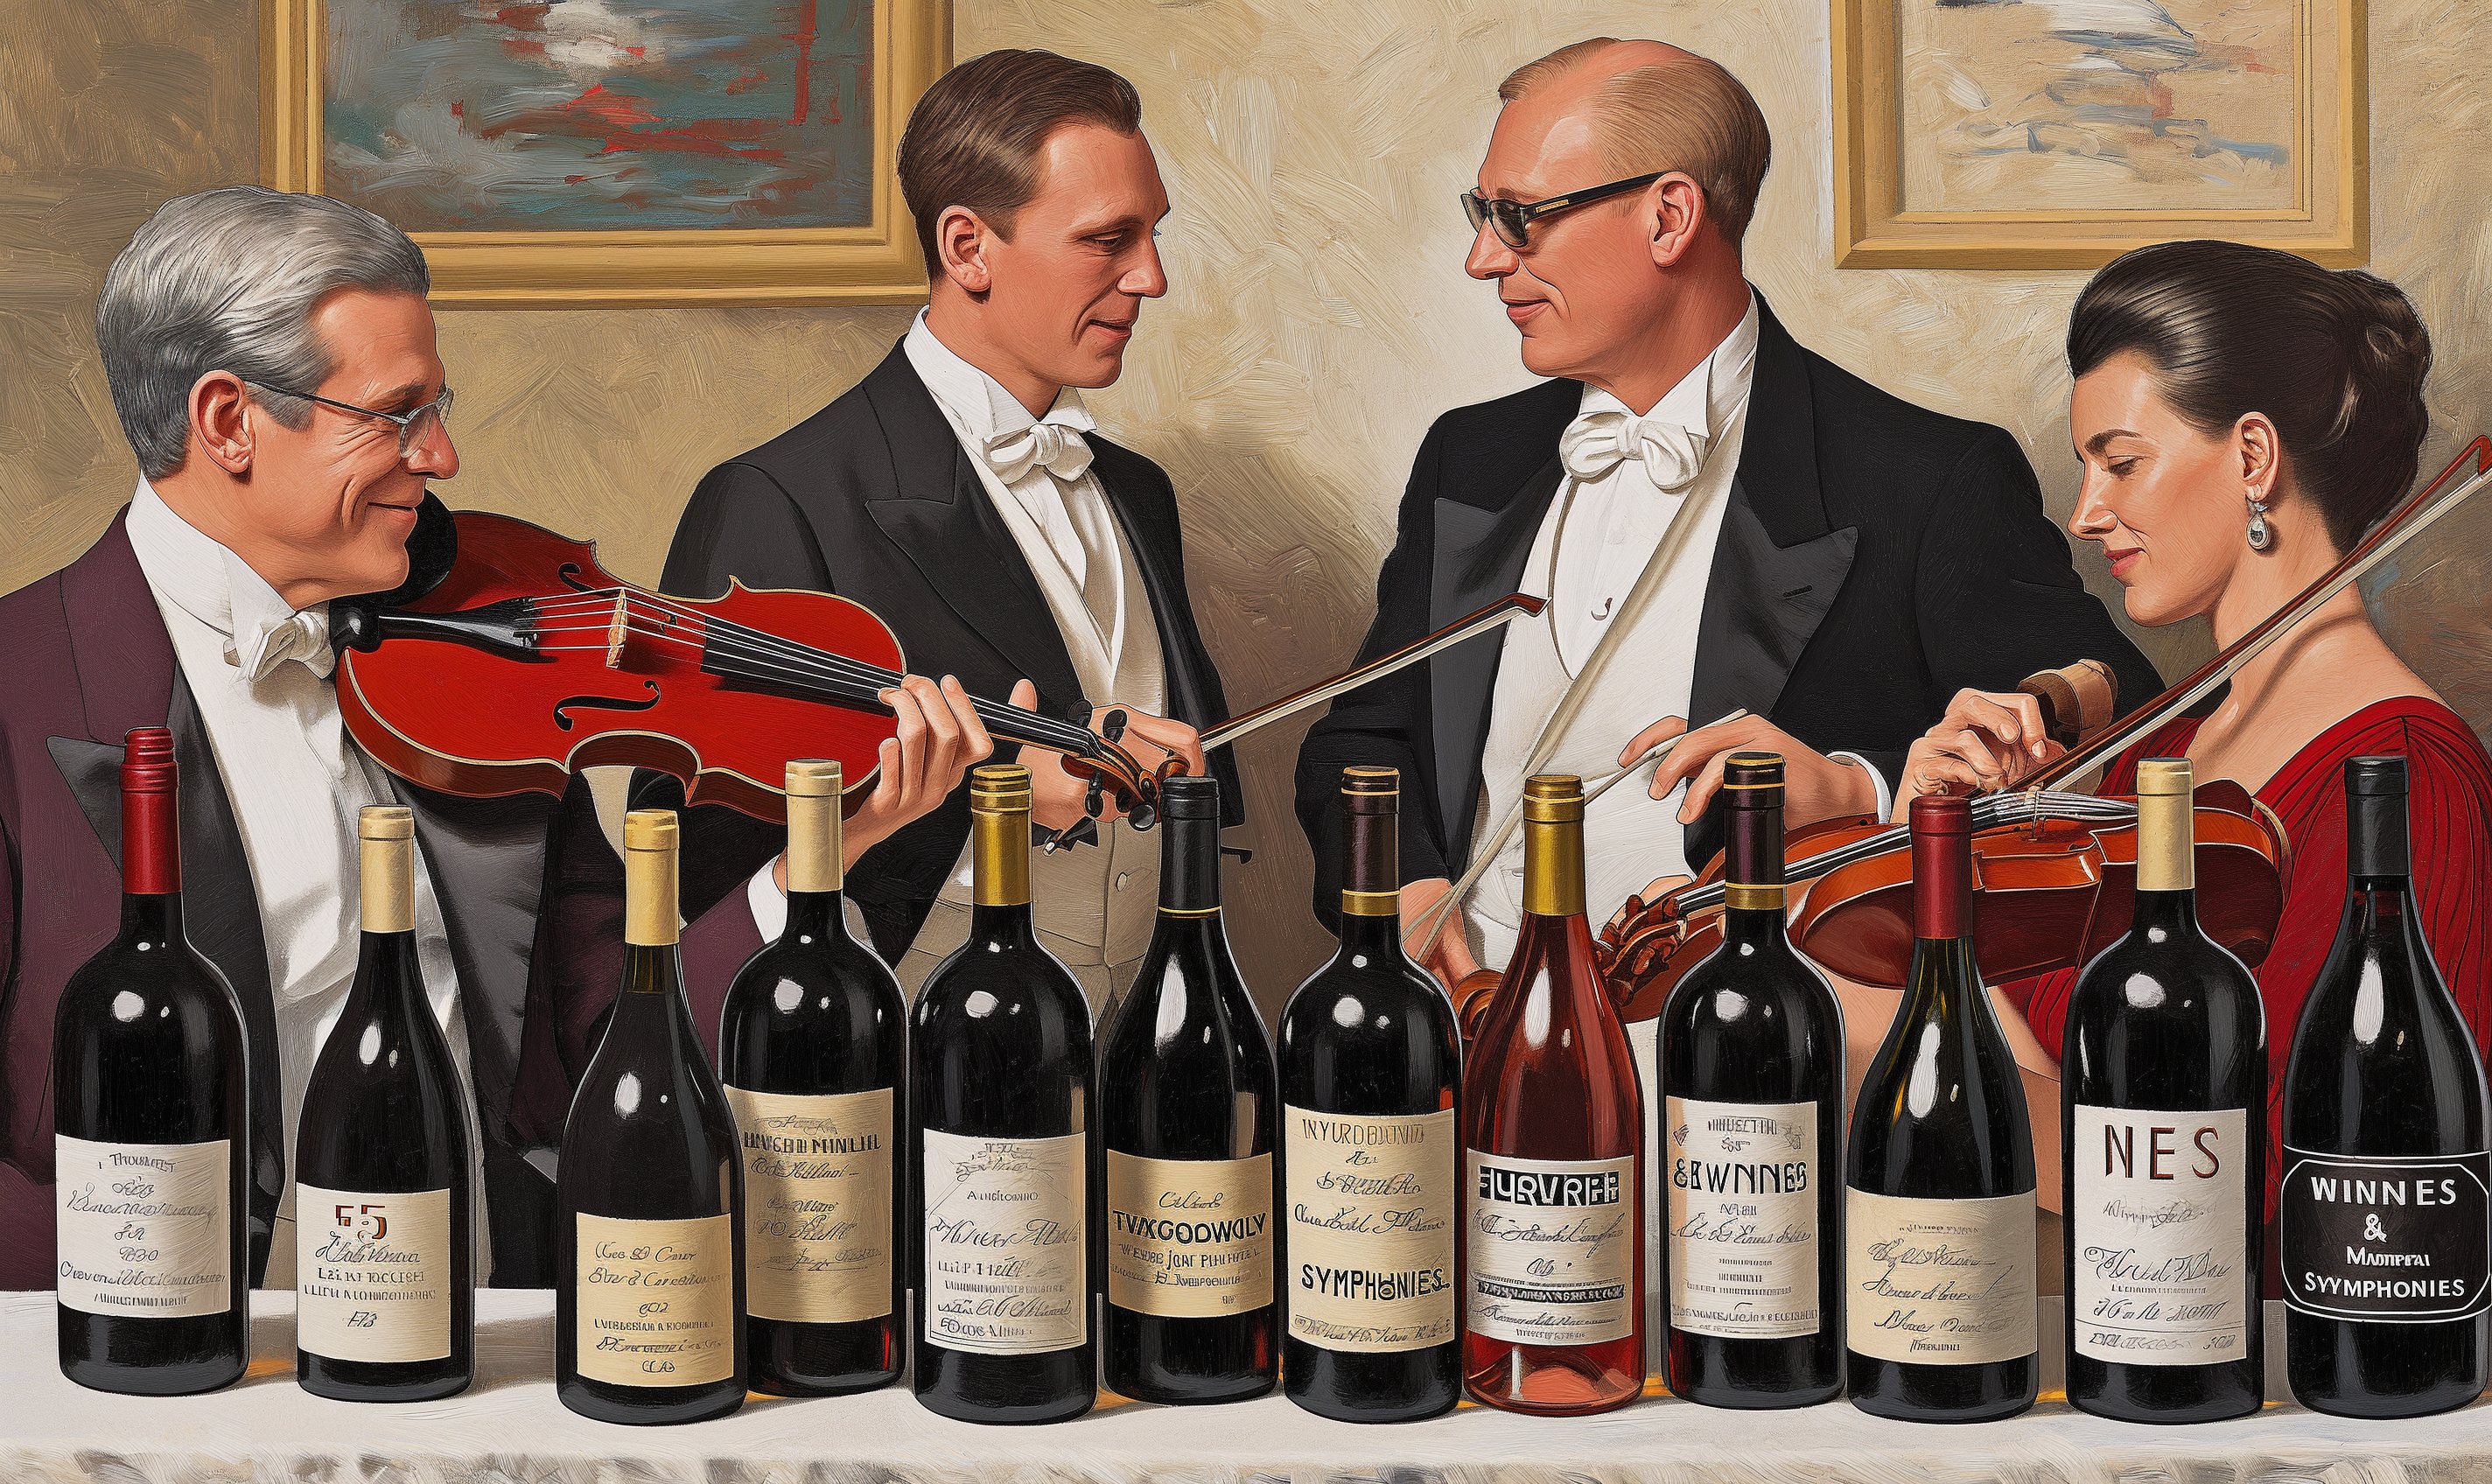 wines & symphonies - classical musicans and wines Wine & Symphonies: A visual representation of 10 harmonious pairings of wine and symphonic music."